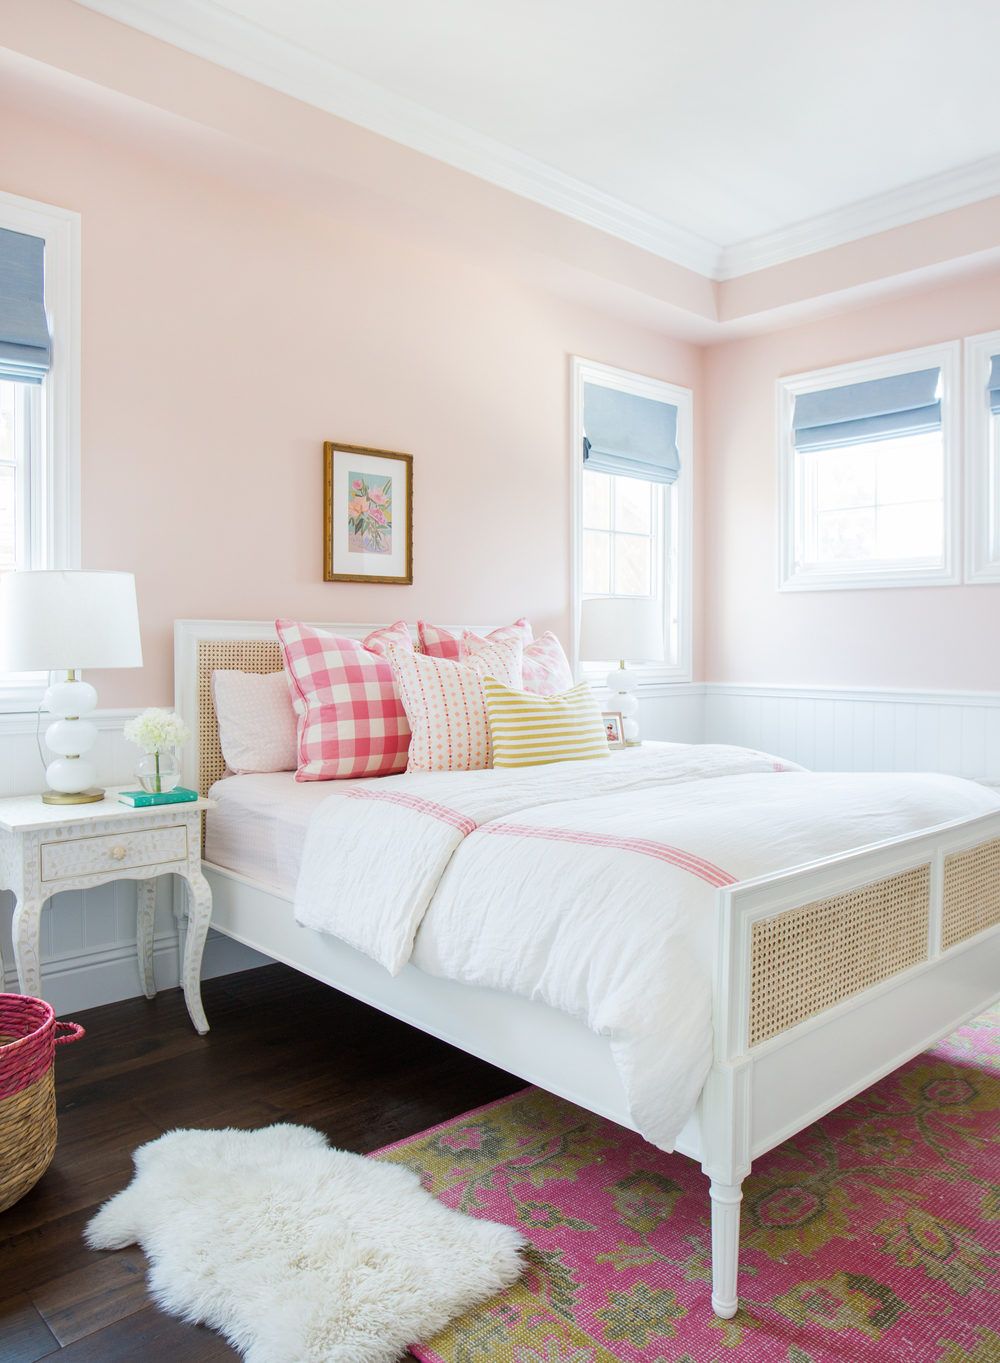 pink two colour combination for bedroom walls images